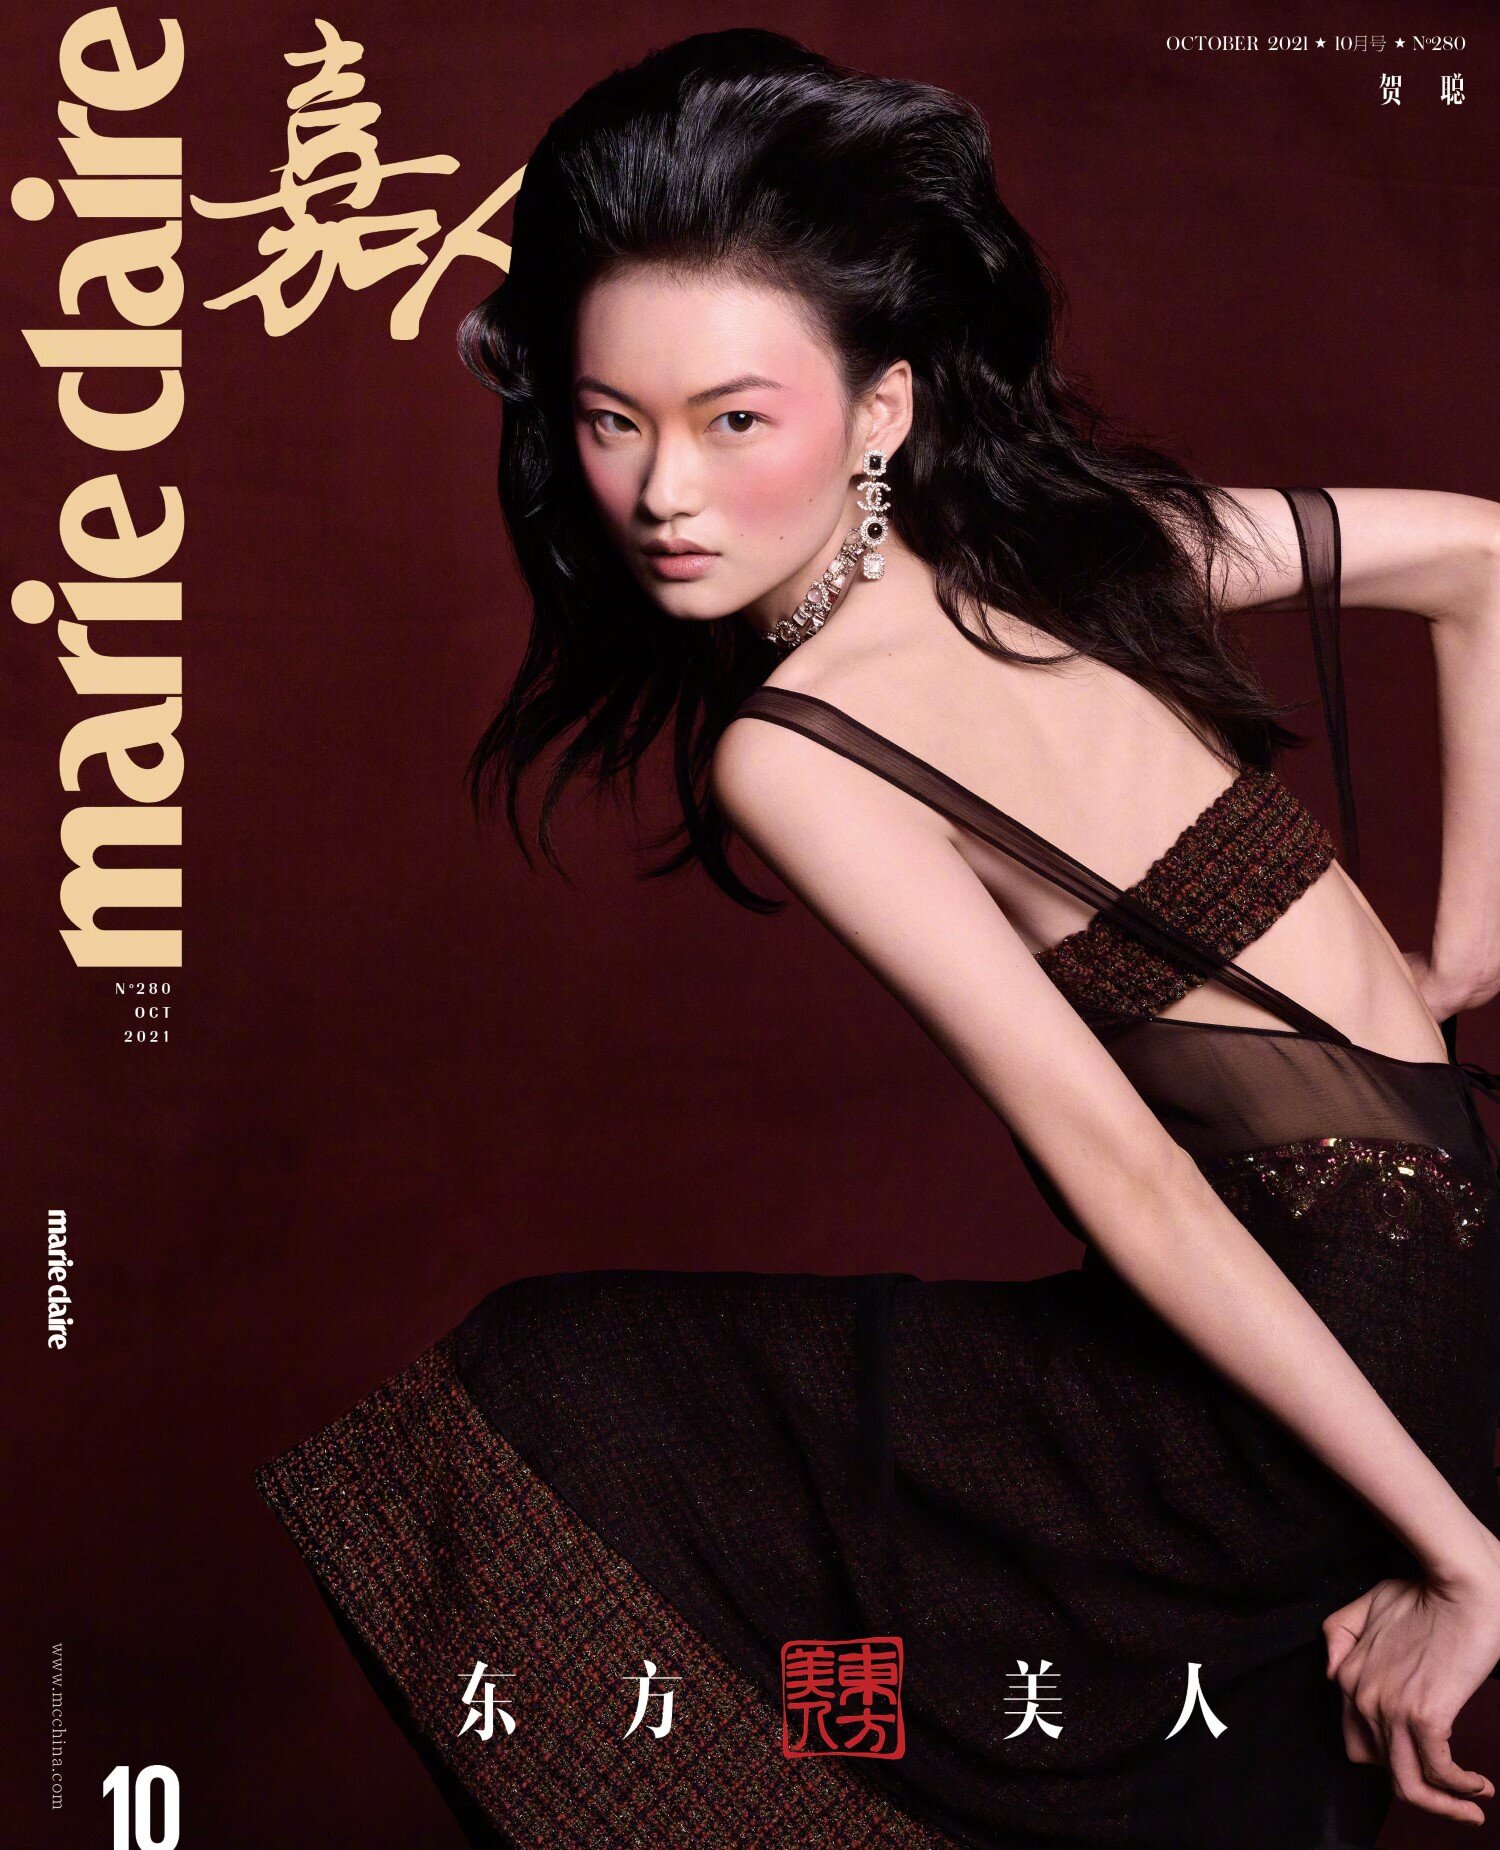 He-Cong-Solo-by-Trunk-Wu-Marie-Claire-China-Oct-2021 Cover-2.jpg